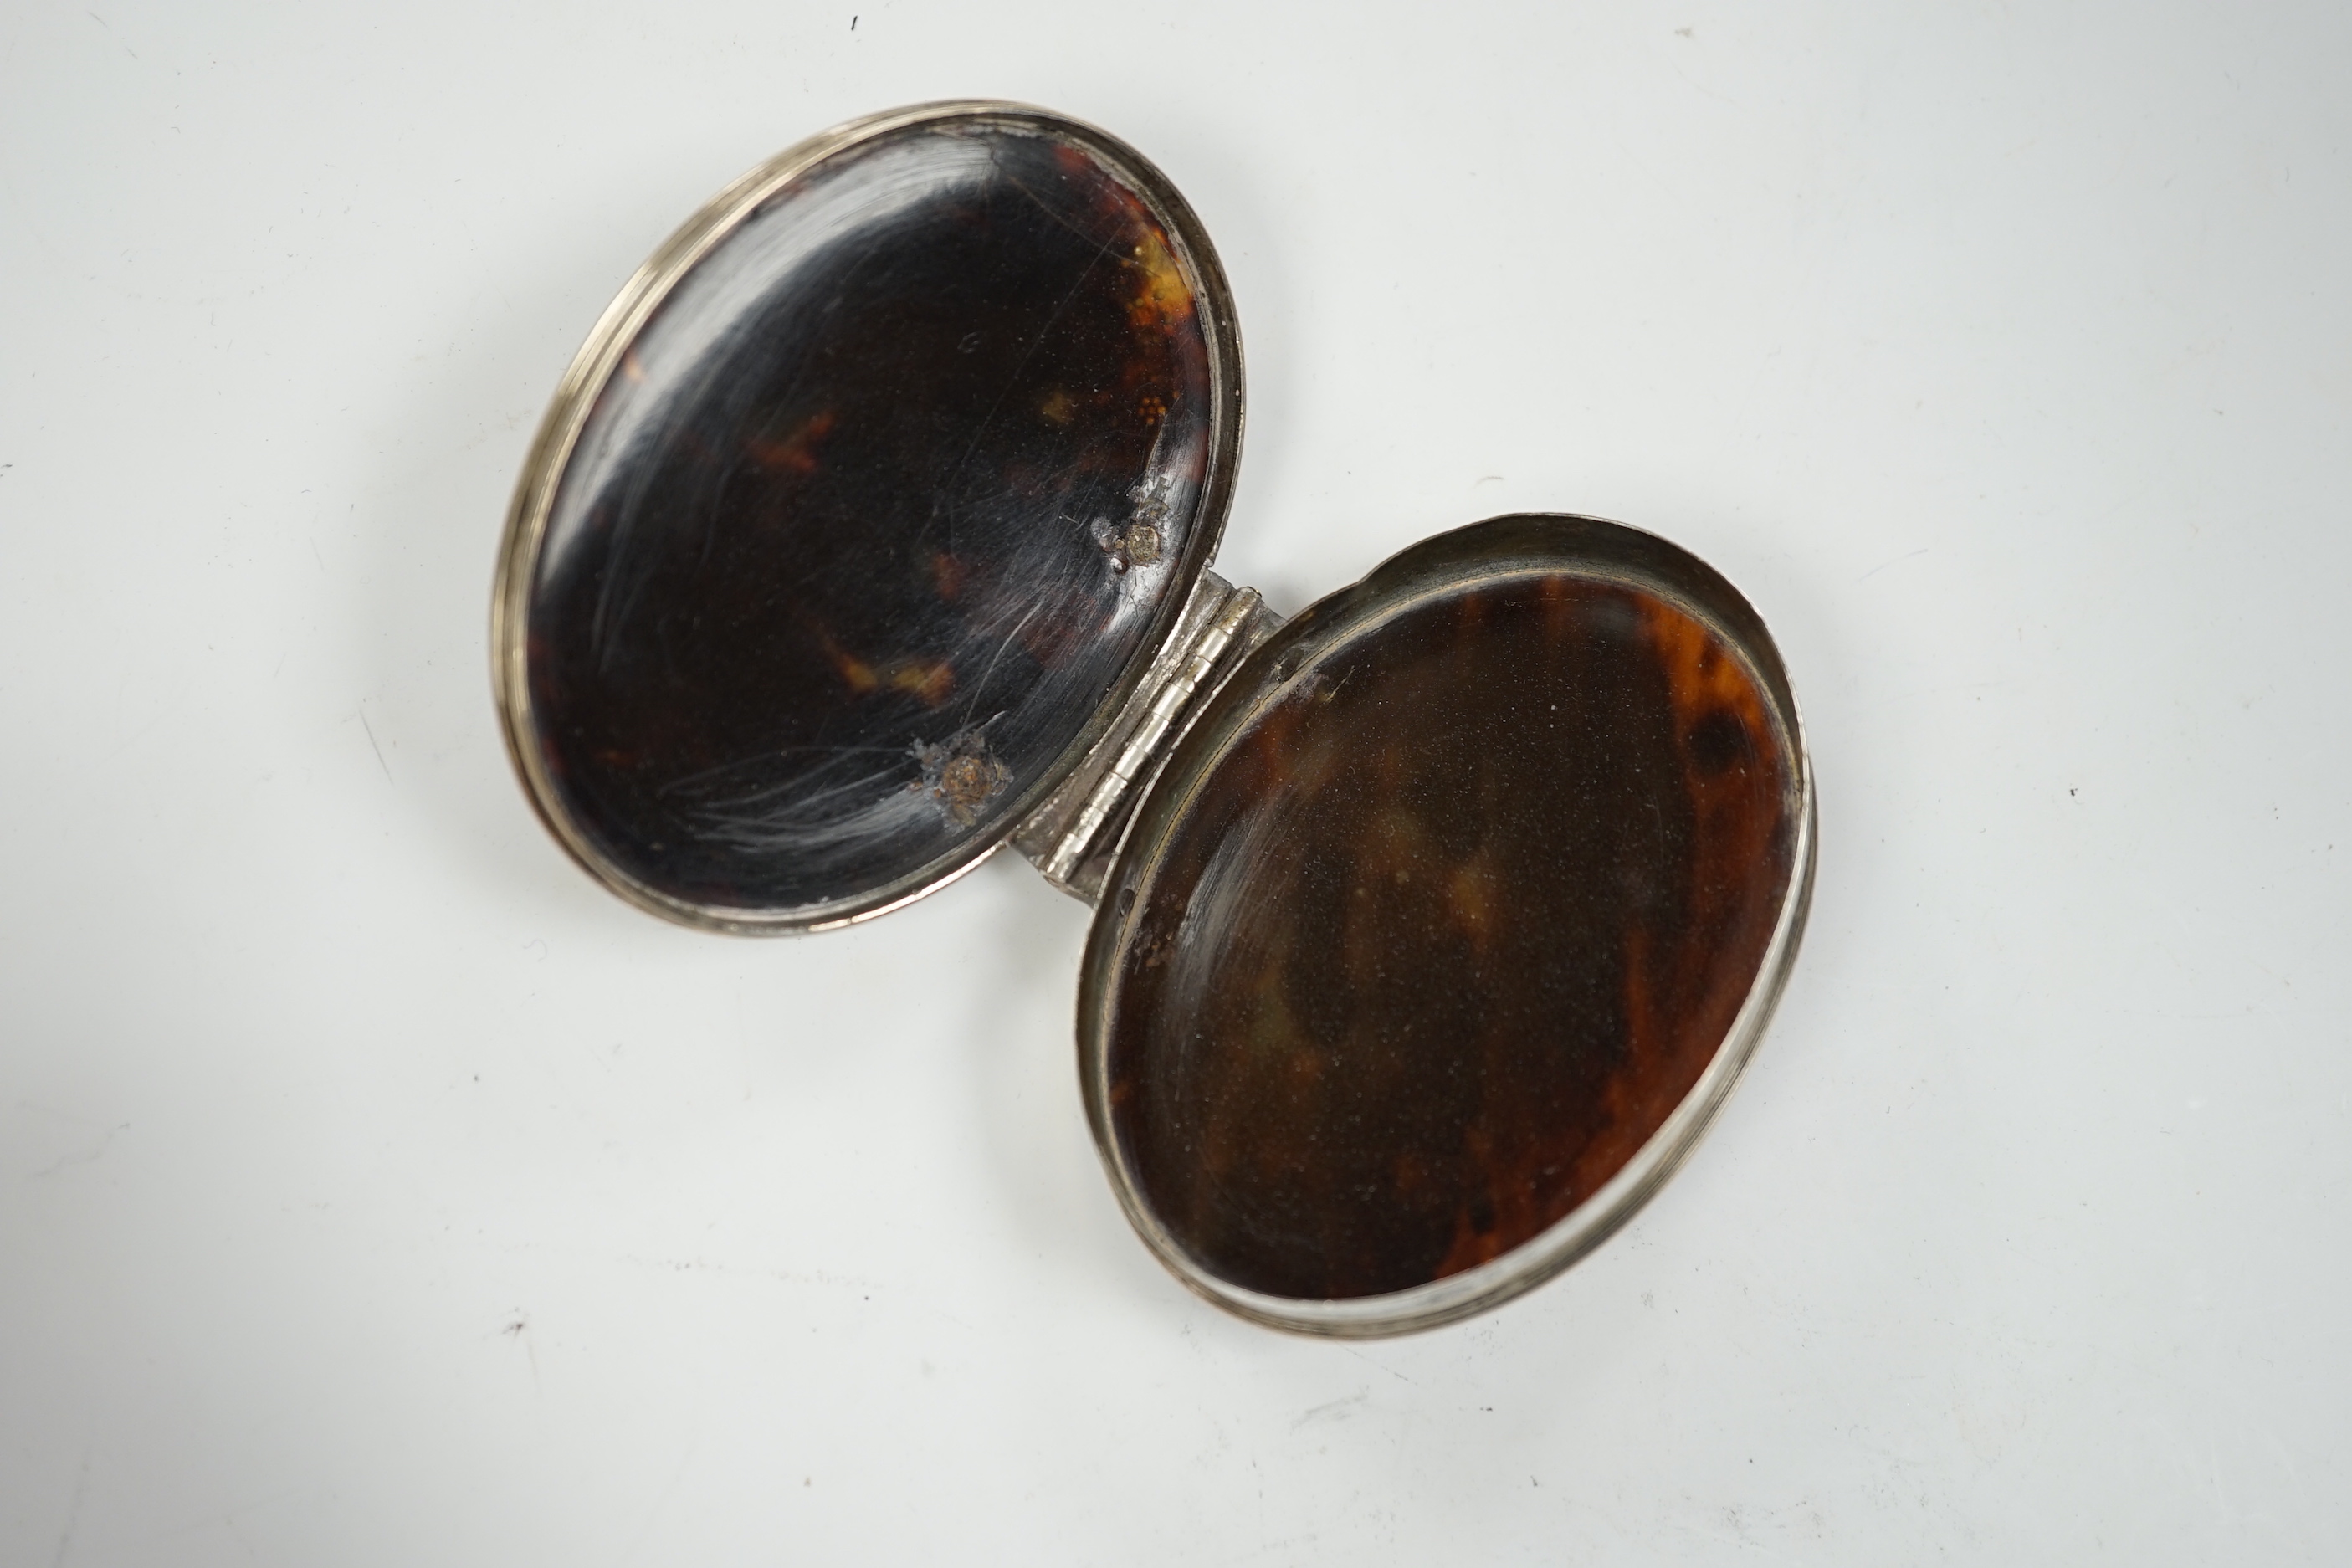 An 18th century white metal mounted tortoiseshell pique oval snuff box, 70mm.